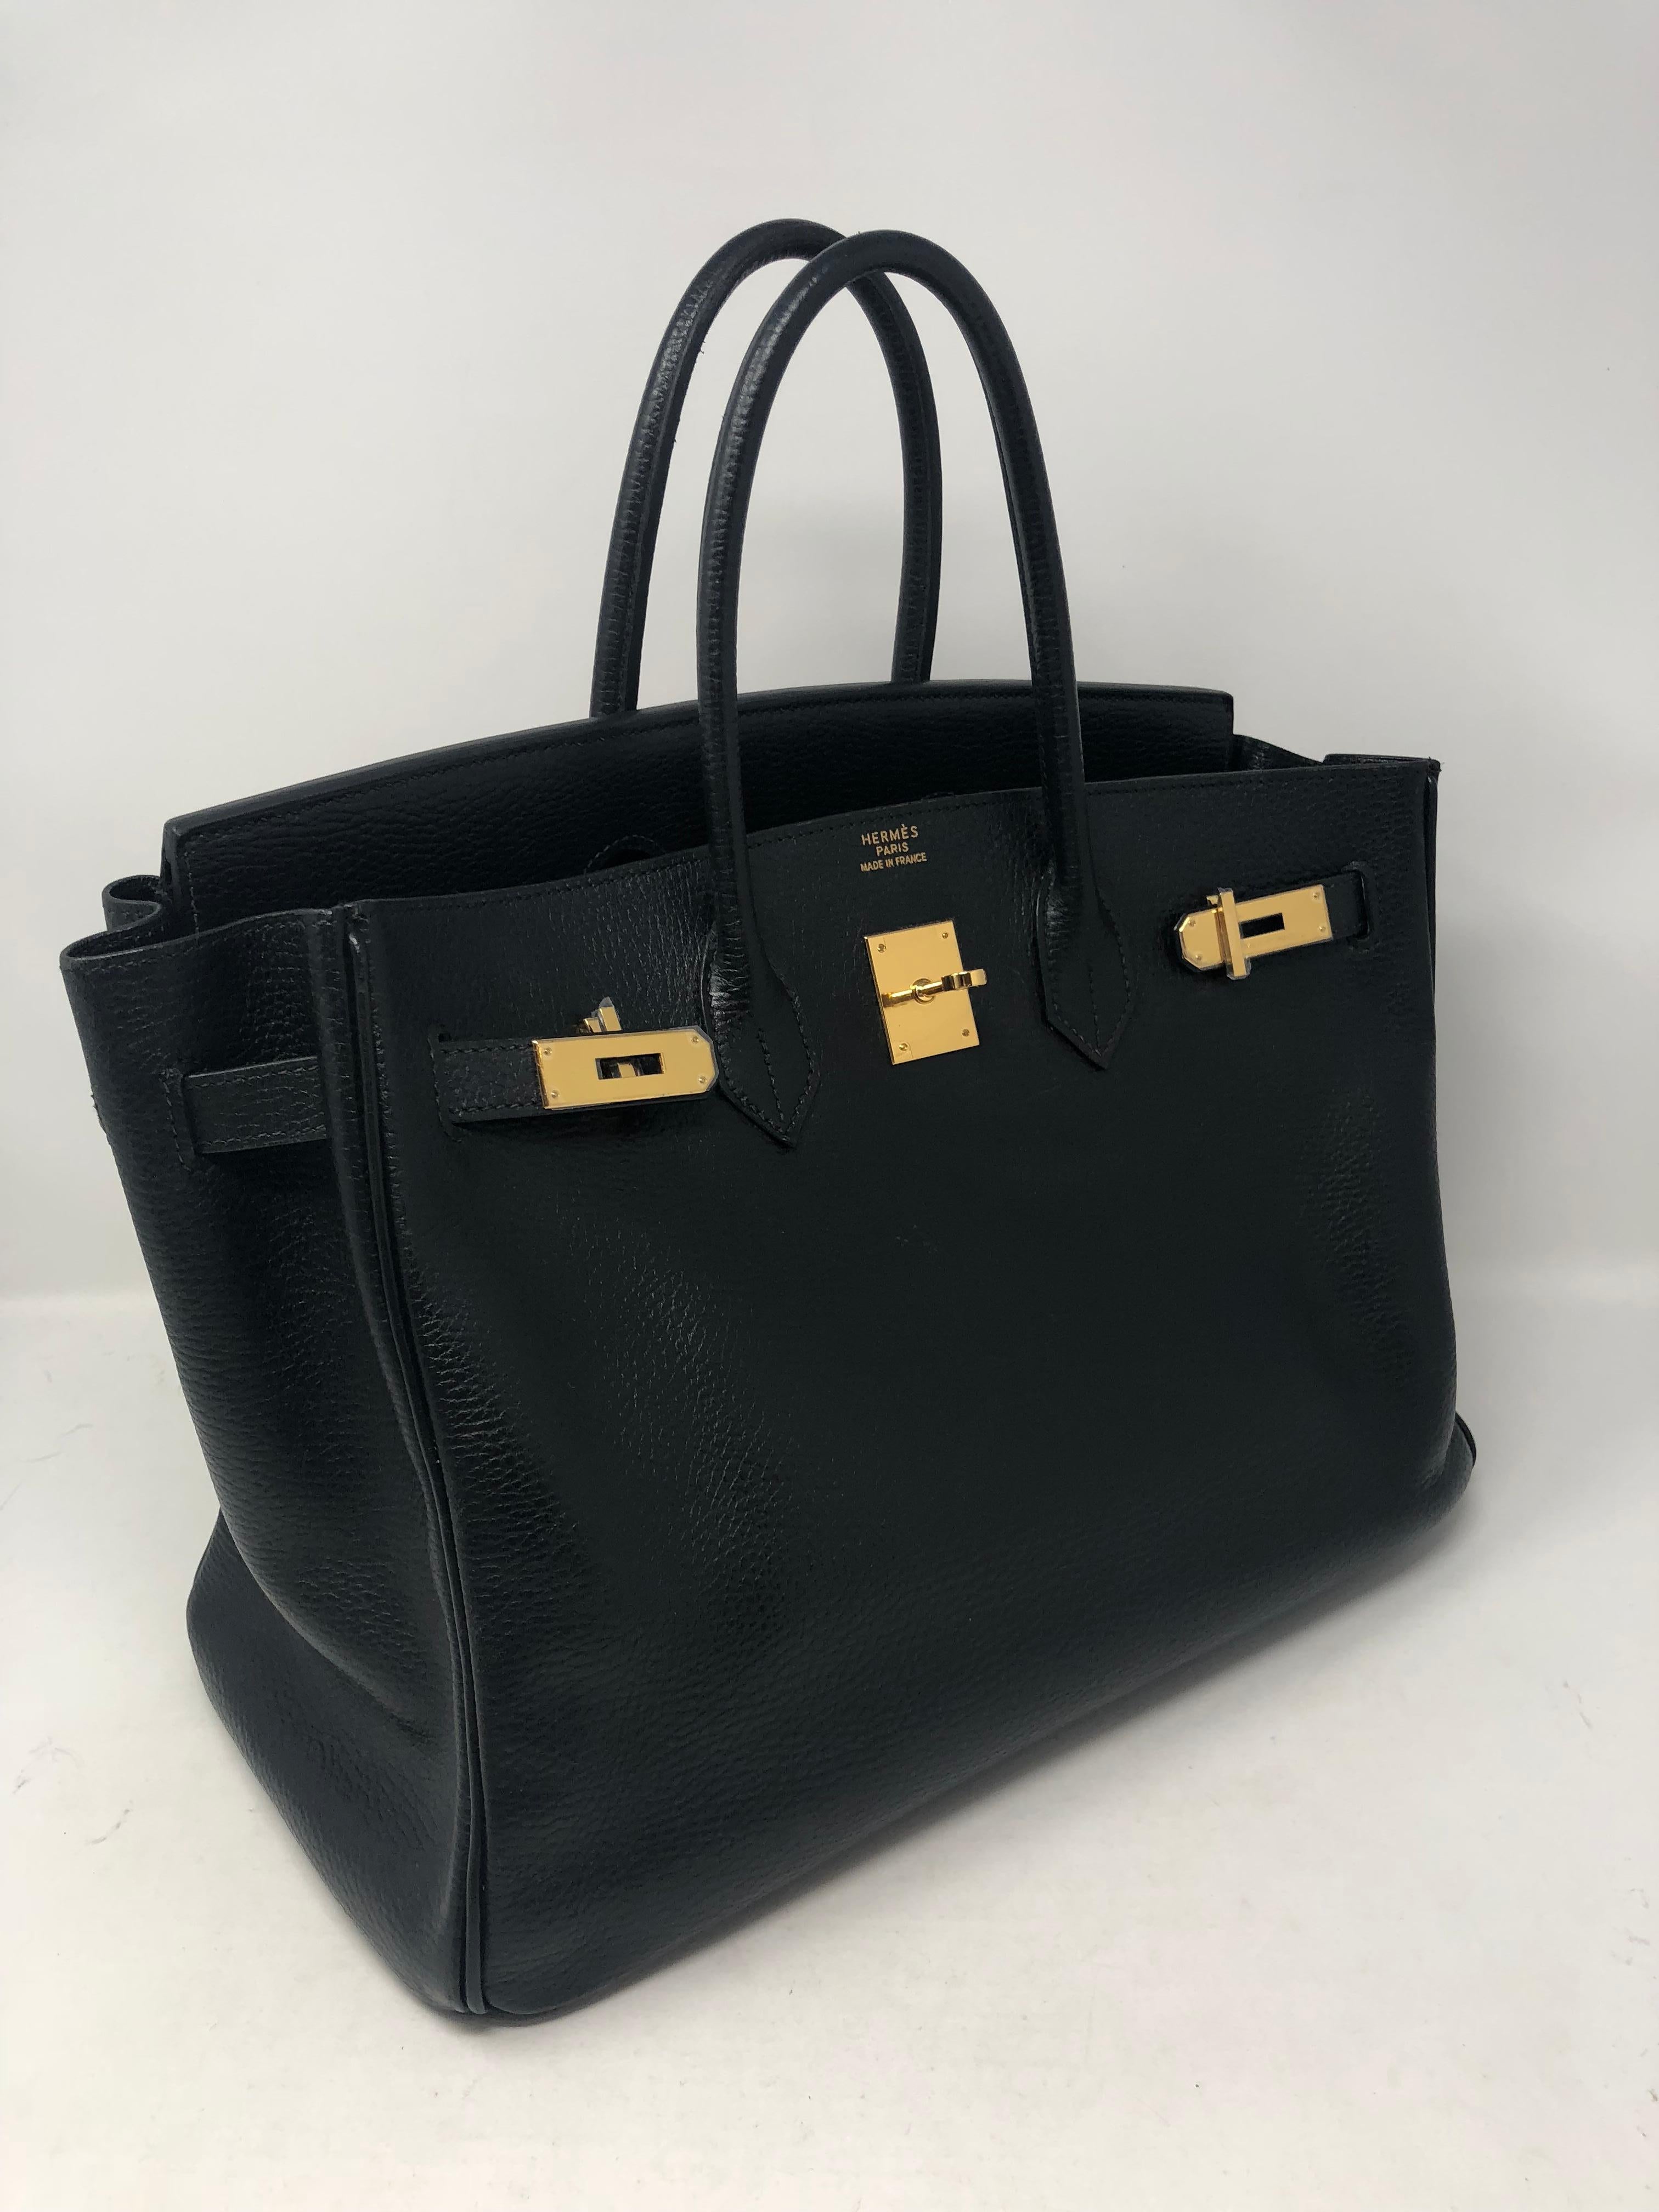 Hermes Black Birkin 35 Ardennes leather with gold hardware. Fully restored at Hermes for spa treatment and new closure with new gold tabs. Receipt from Hermes for the new plates and closure included with the bag. Beautiful black leather with some